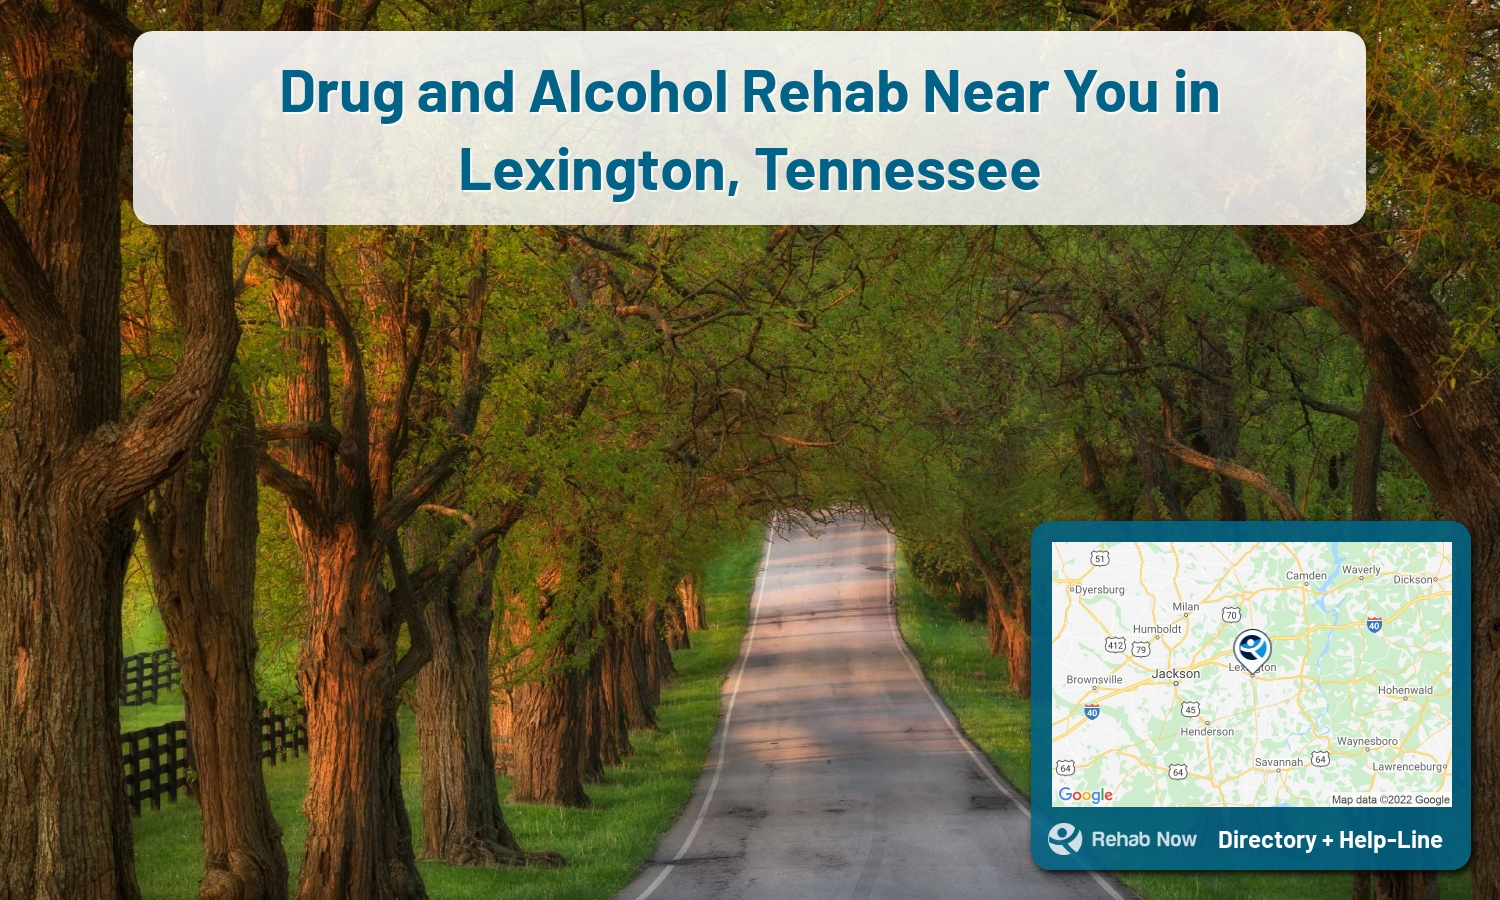 Need treatment nearby in Lexington, Tennessee? Choose a drug/alcohol rehab center from our list, or call our hotline now for free help.